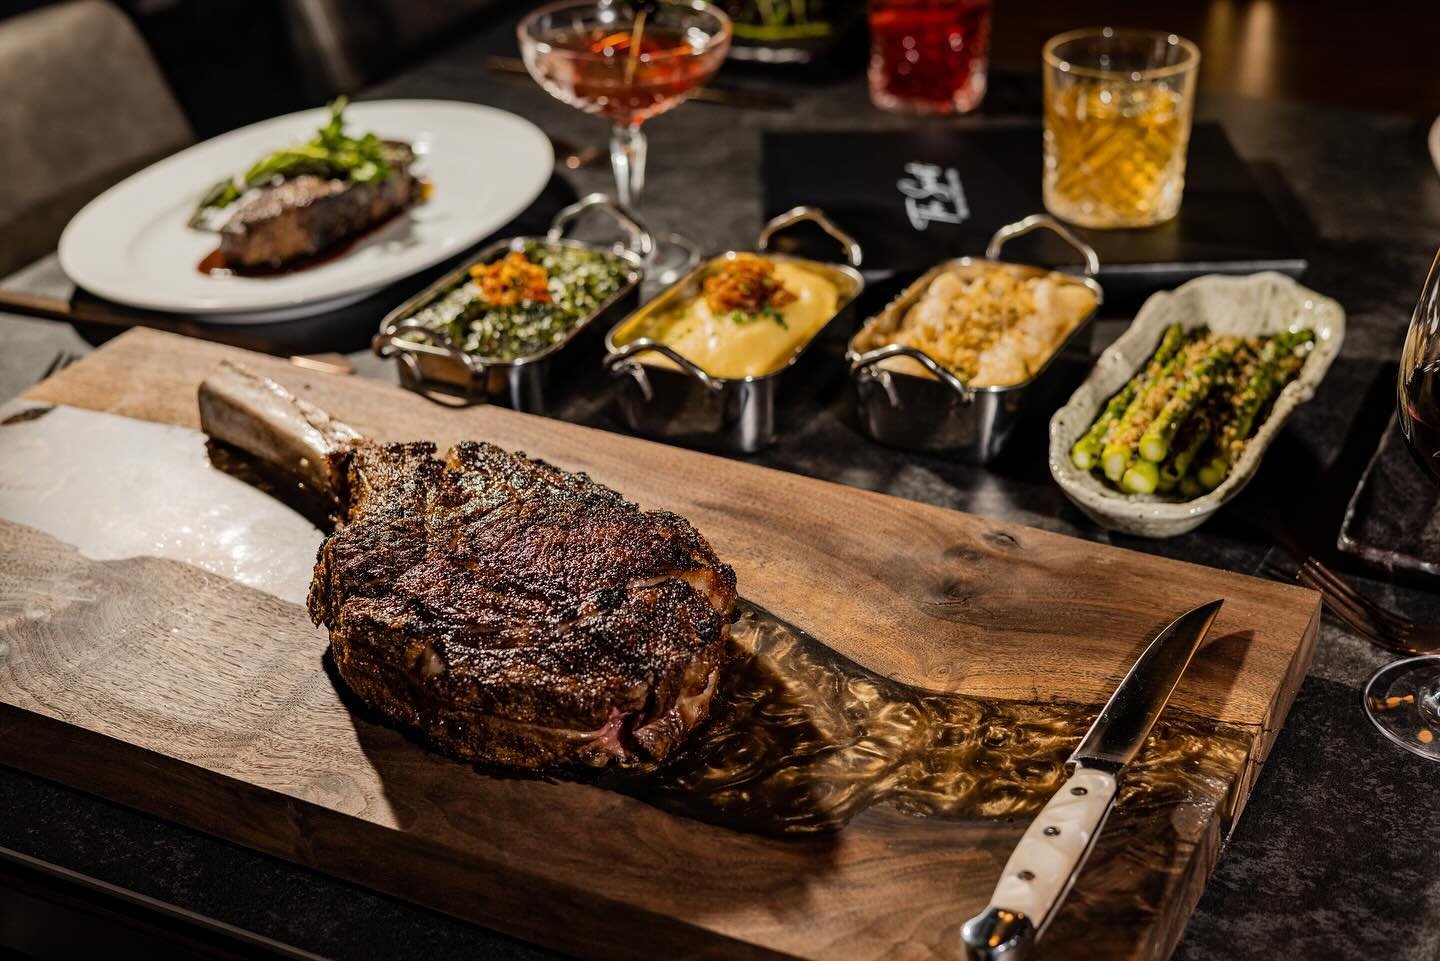 Tuesday is made for Tomahawks! 3 course dinner for 2 including our Texas Wagyu Tomahawk Ribeye for only $195!